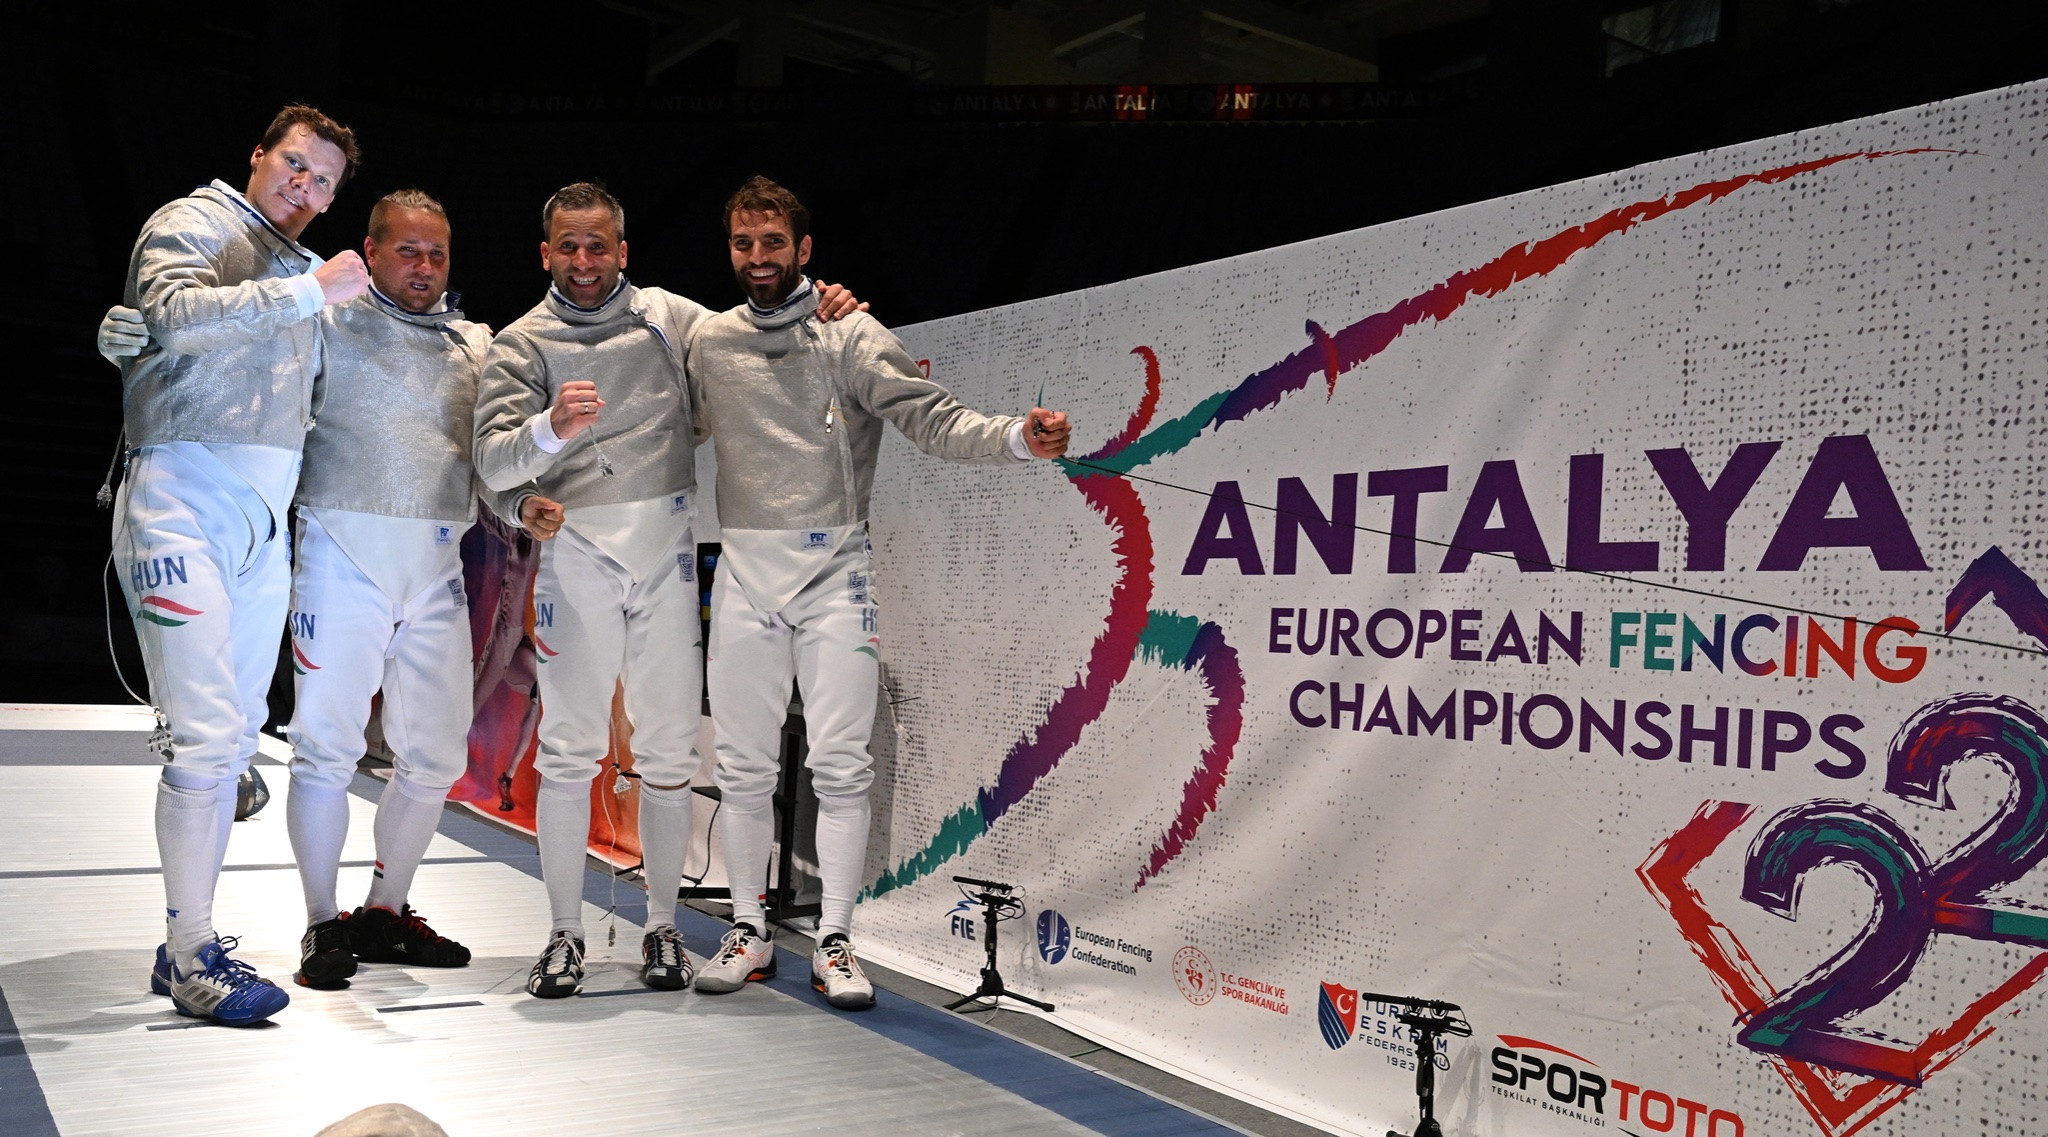 Hungary overcame a tough challenge against Ukraine to win the men's team sabre event in Antalya ©Getty Images